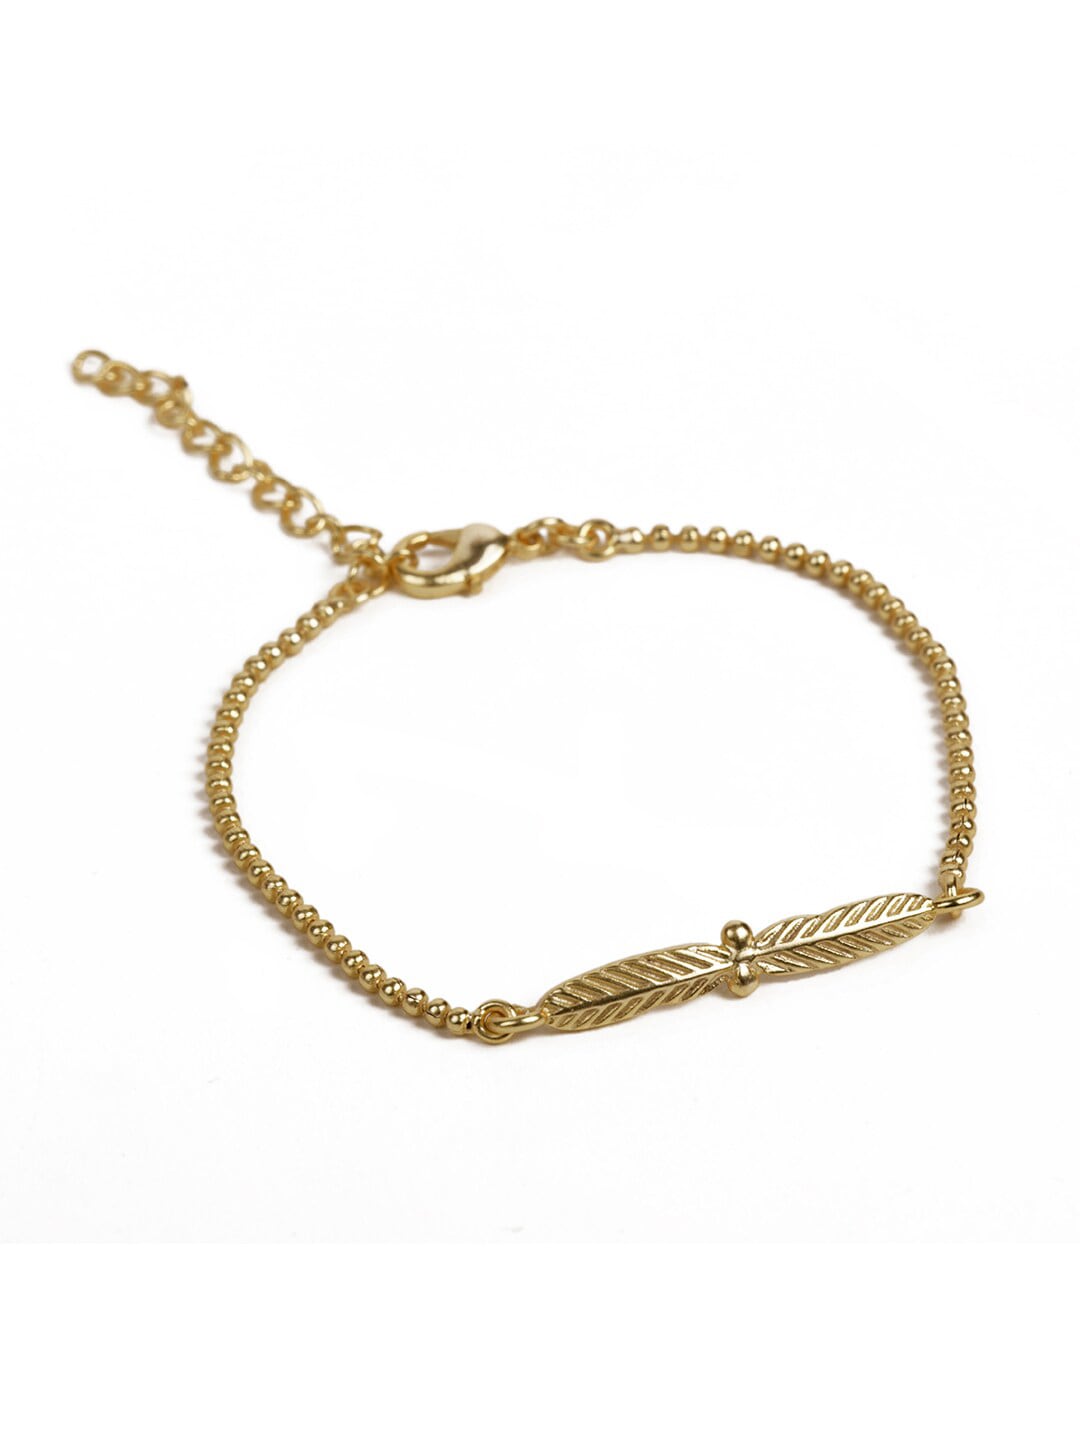 STILSKII Unisex Gold-Toned Brass Gold-Plated Charm Bracelet Price in India